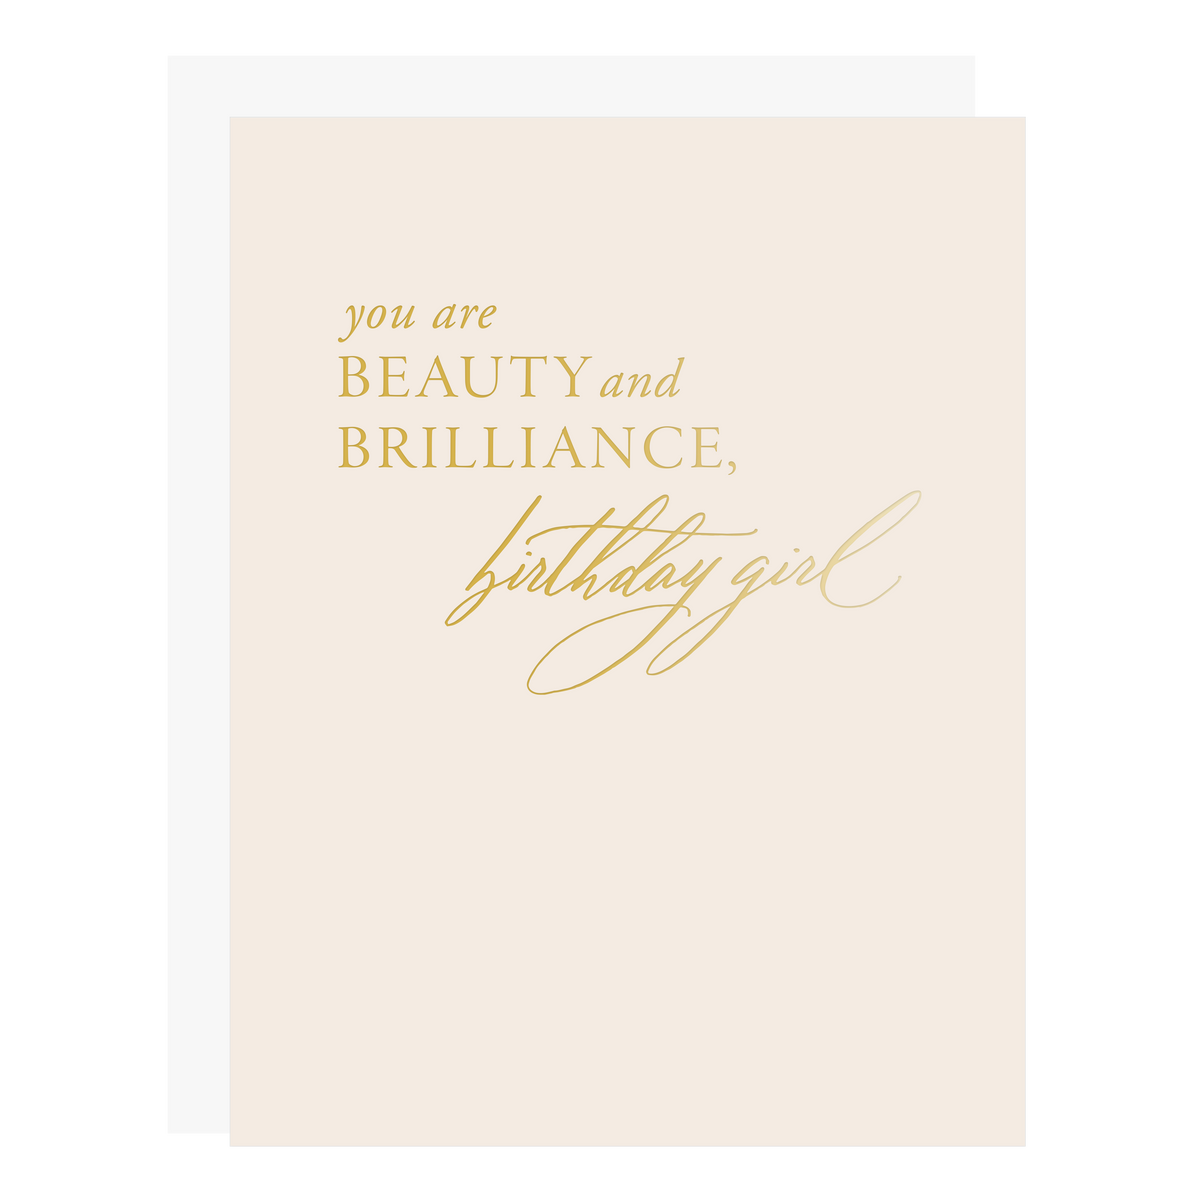 &quot;Beauty Brilliance Birthday&quot; card, letterpress printed by hand in gold foil.